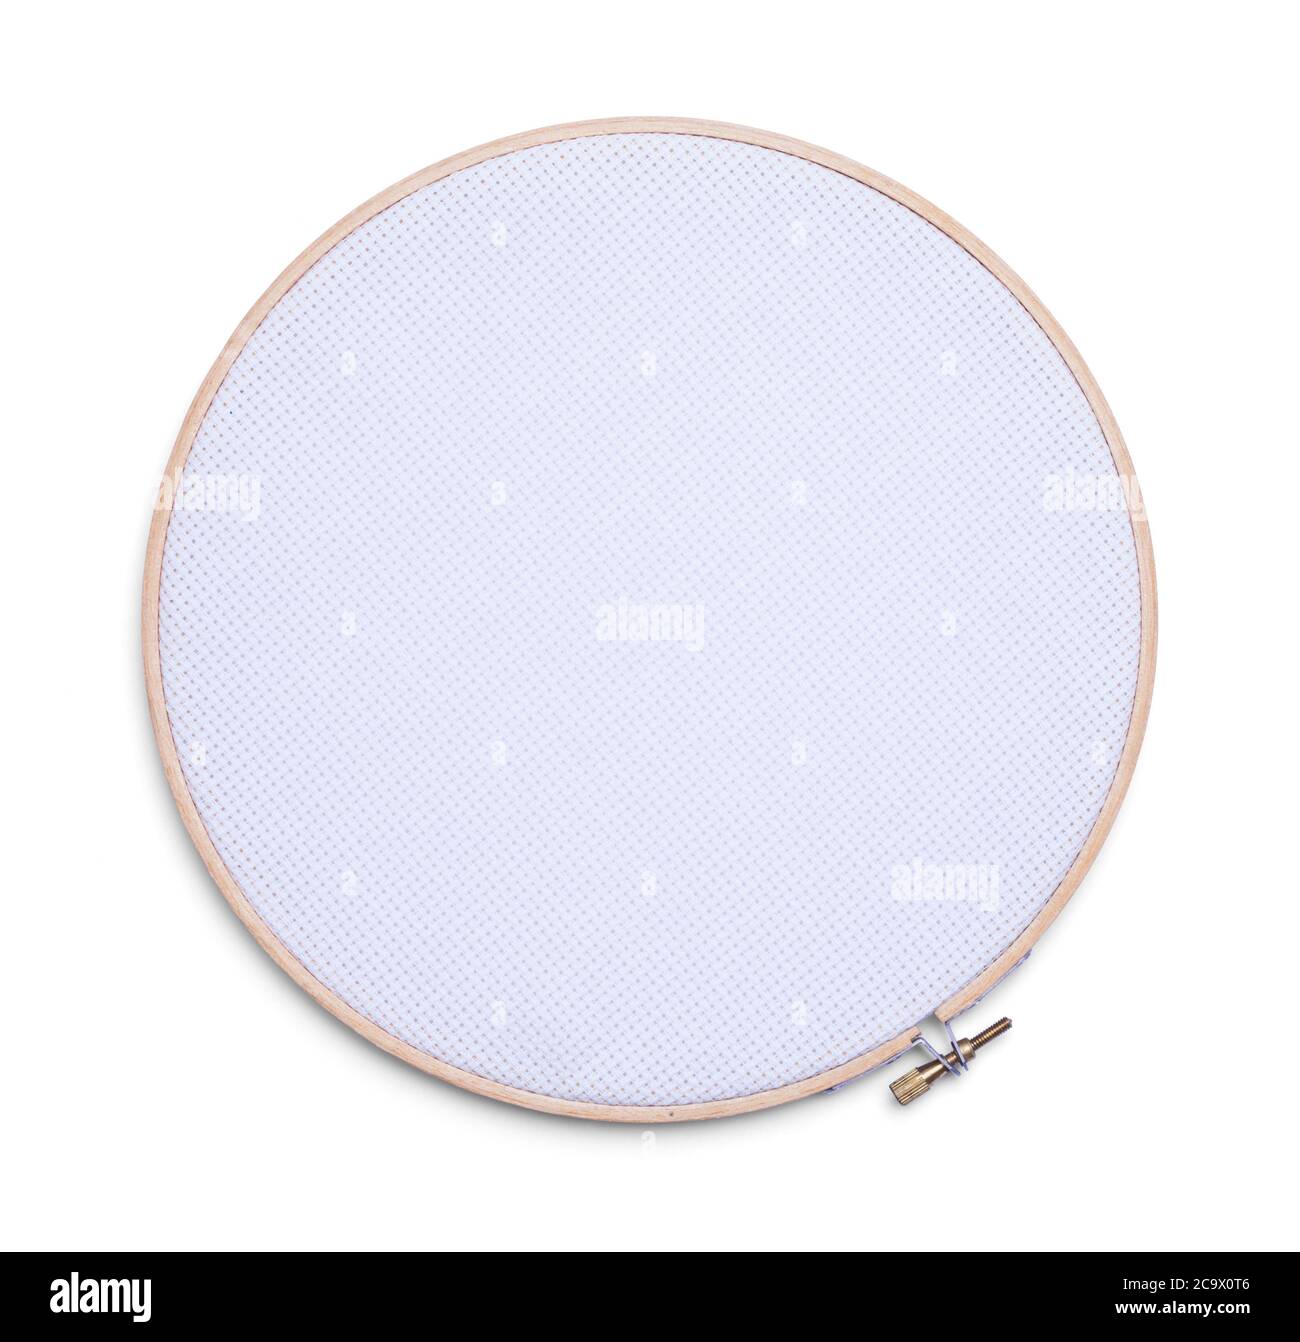 Cross Stitch Hoop Isolated on White Background. Stock Photo